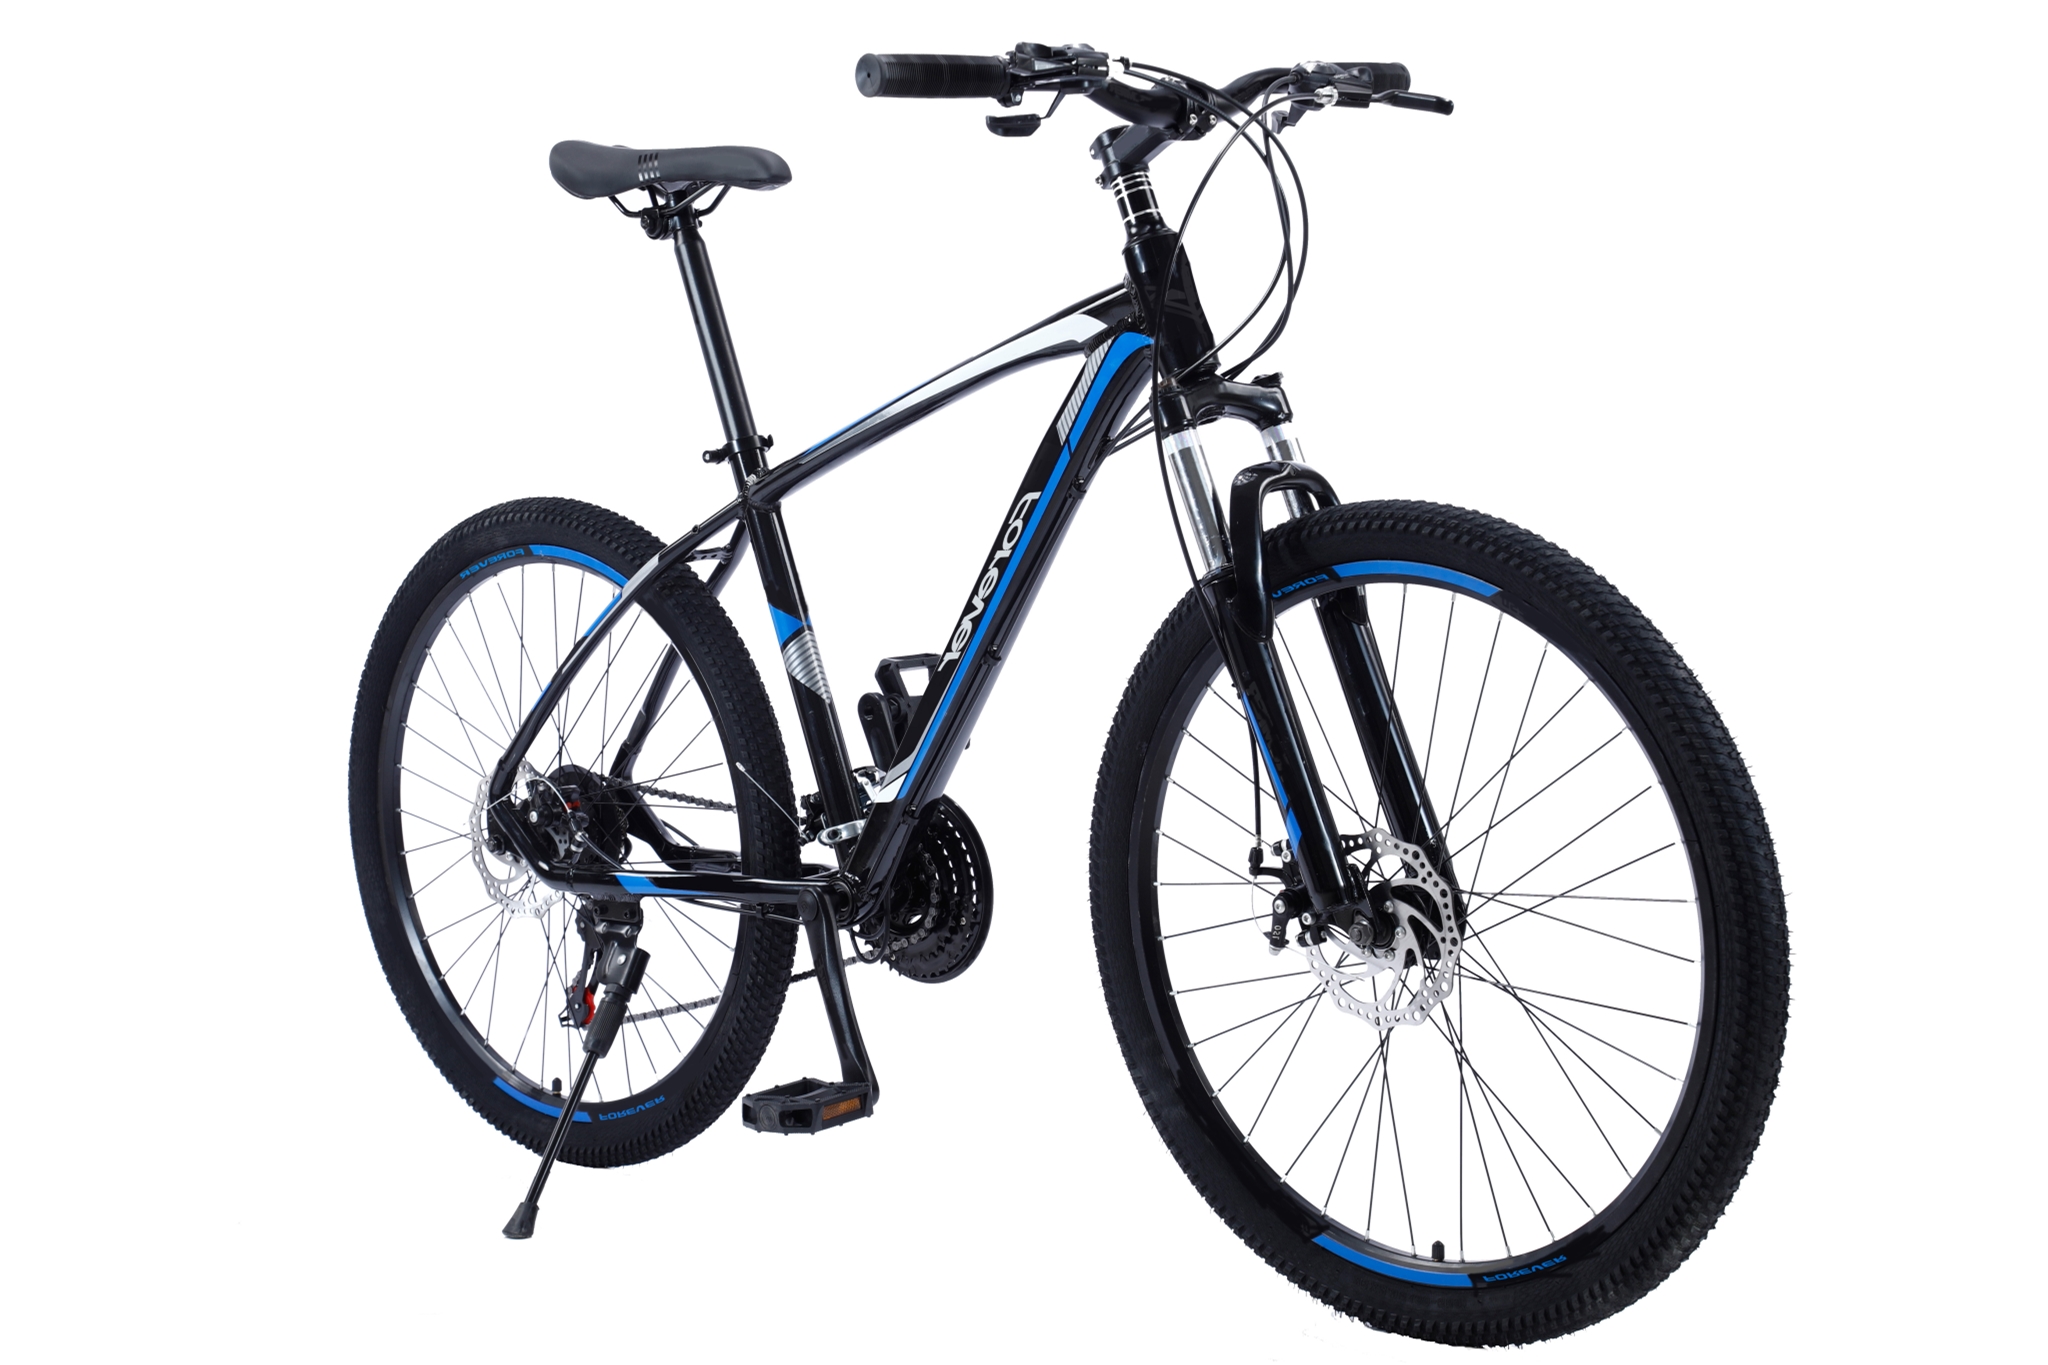 SFM135 Chinese Mountain Bicycle | Harbor Blue